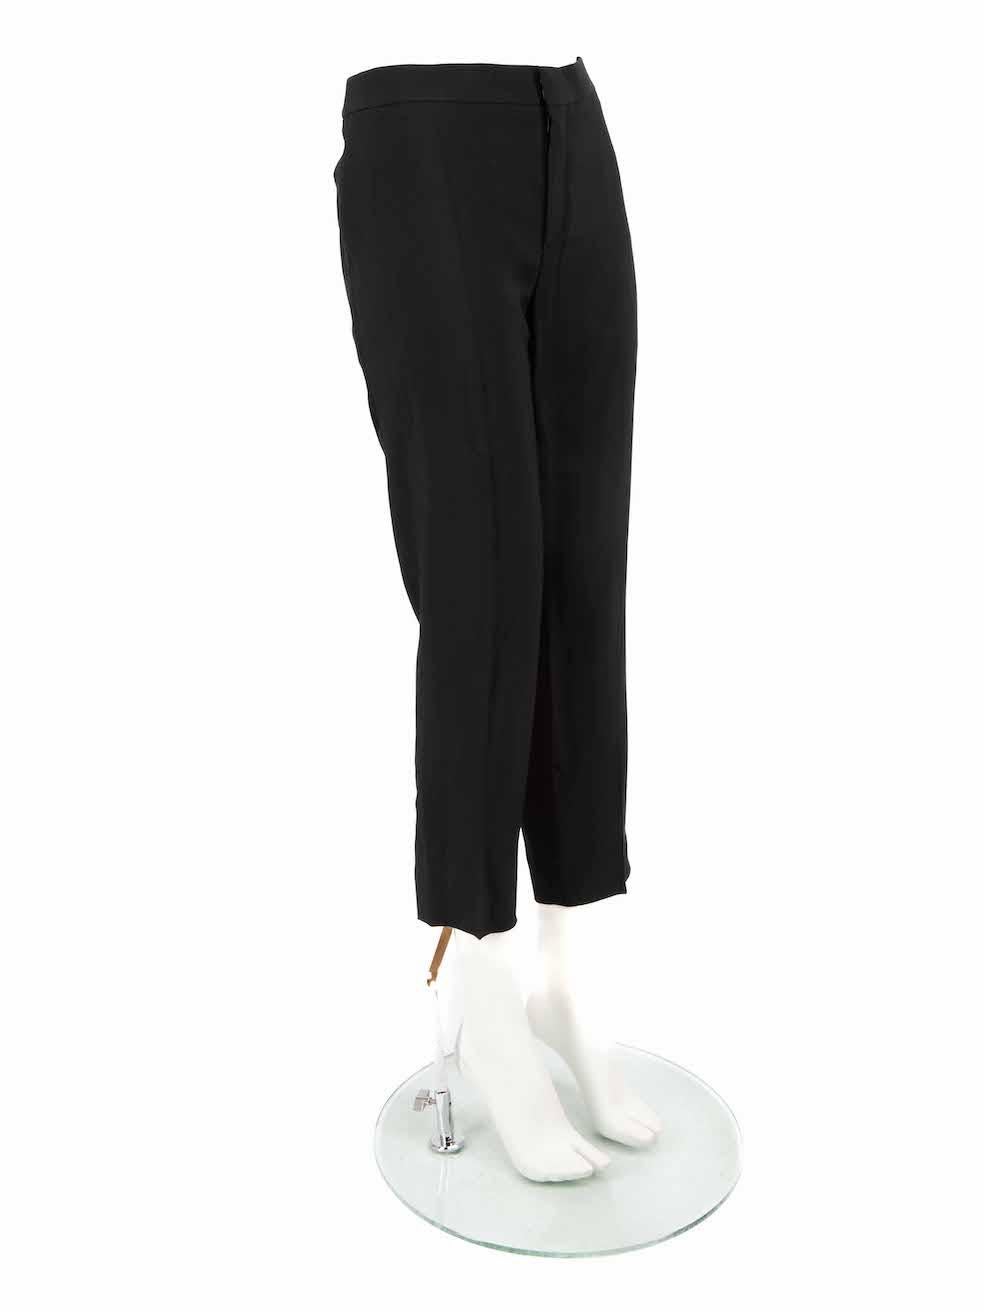 CONDITION is Very good. Minimal wear to trousers is evident. Minimal wear to the left leg with a pull to the weave above the cuff on this used Chloé designer resale item.
 
 
 
 Details
 
 
 Black
 
 Synthetic
 
 Trousers
 
 Cropped
 
 Mid rise
 
